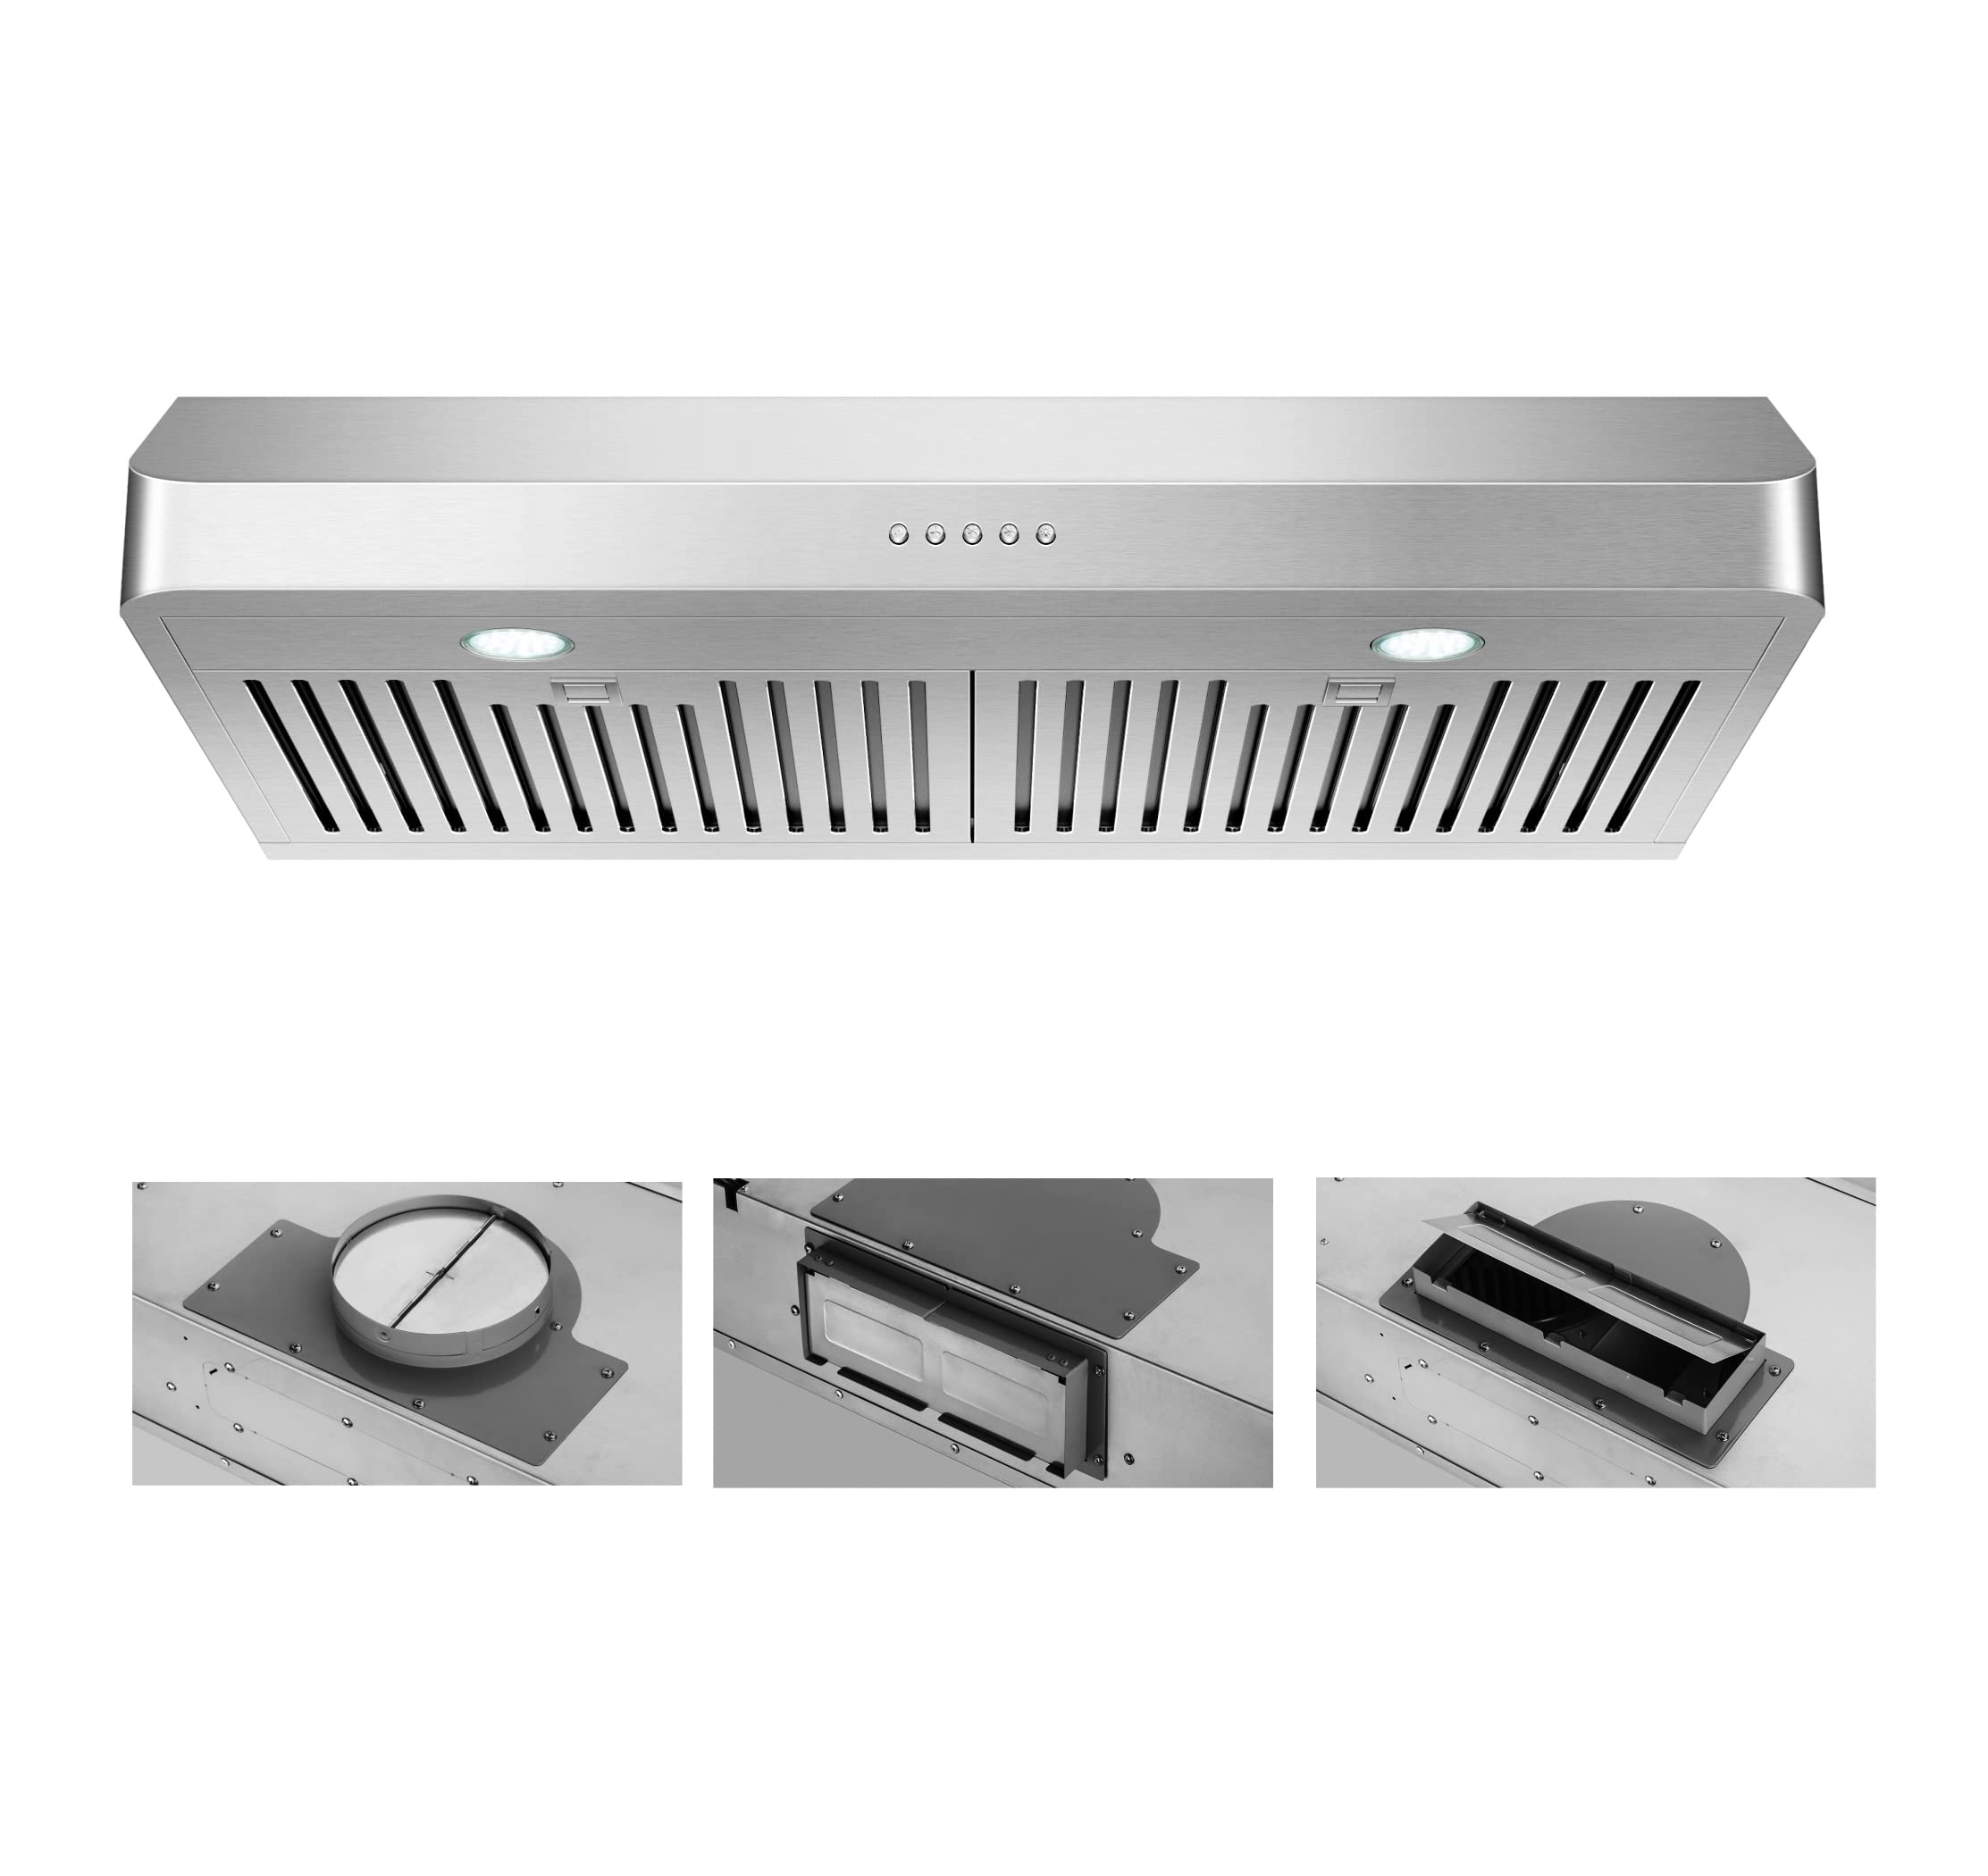 EVERKITCH 30 Inch Under cabinet Range Hood Kitchen Vent Hood,Built in Range Hood for Ducted in Stainless Steel, 400 cFM with Permanent Sta